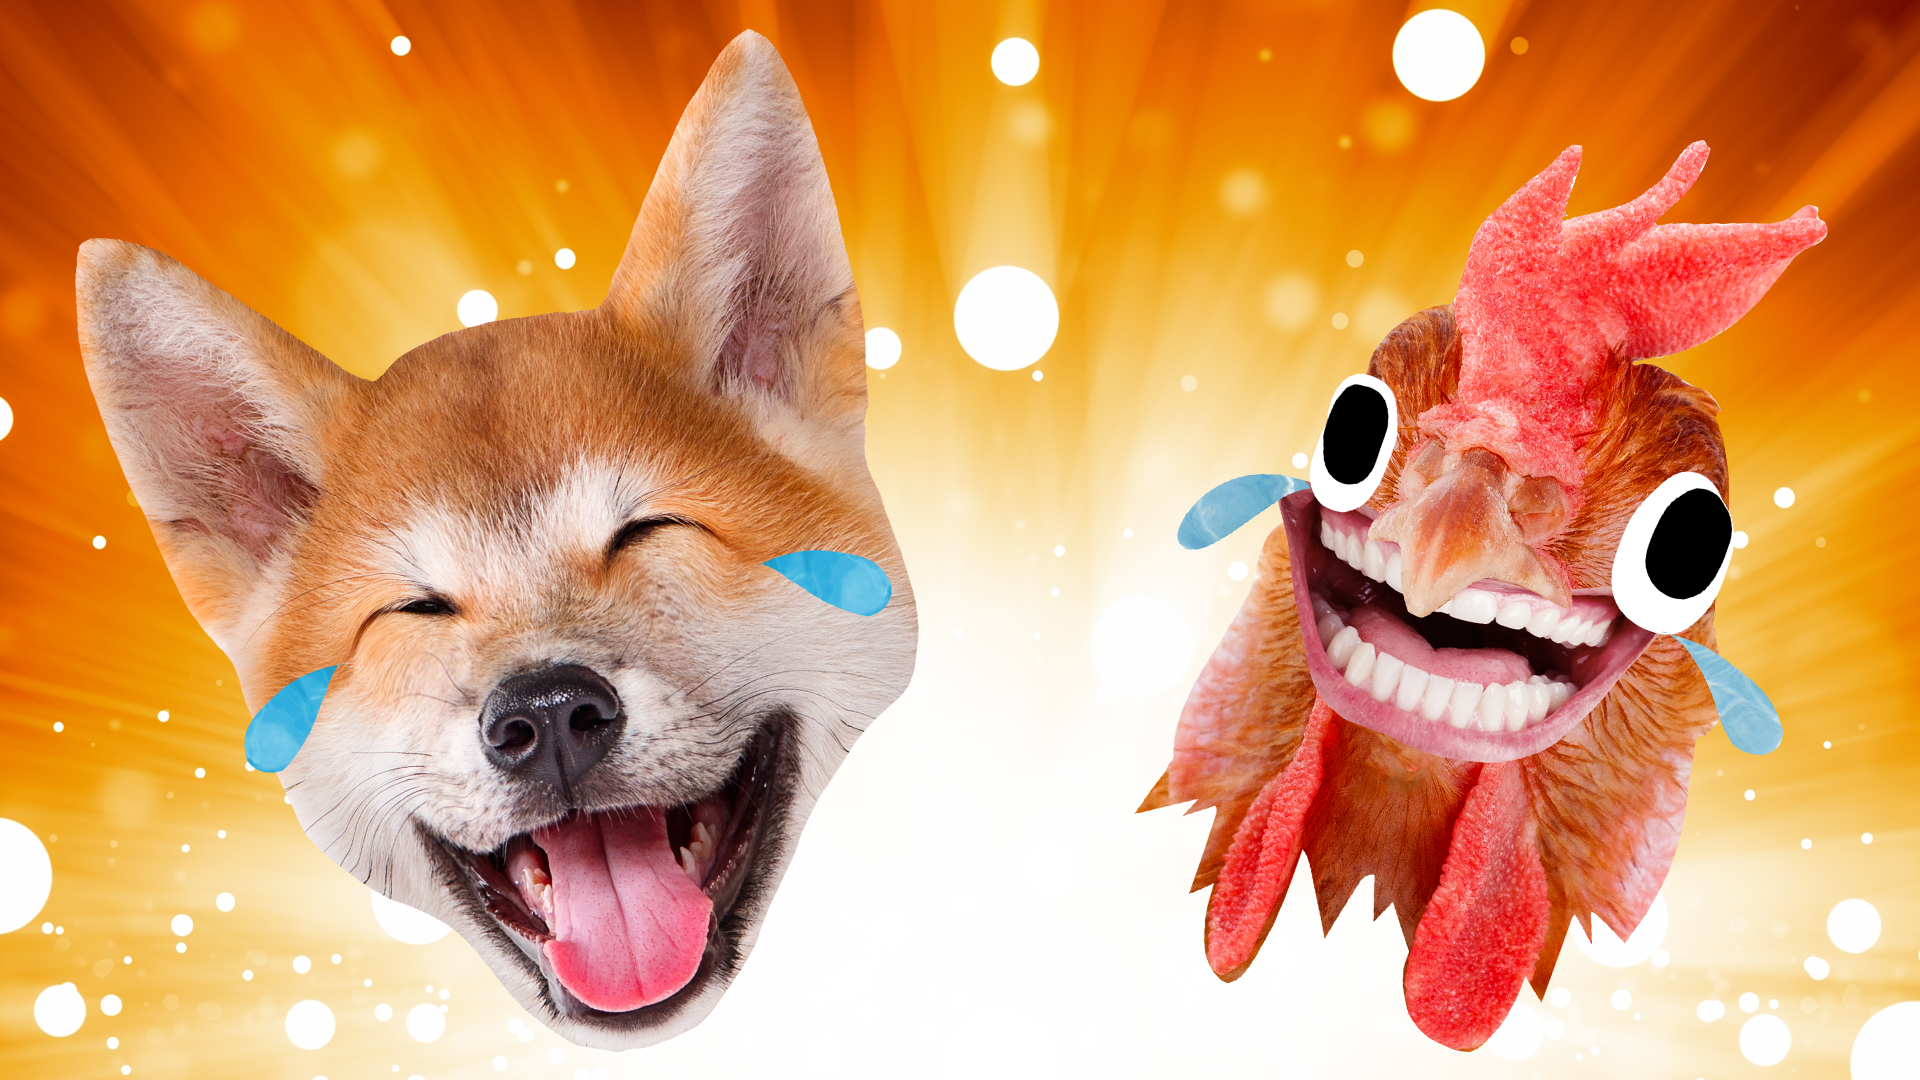 A dog and chicken laughing 